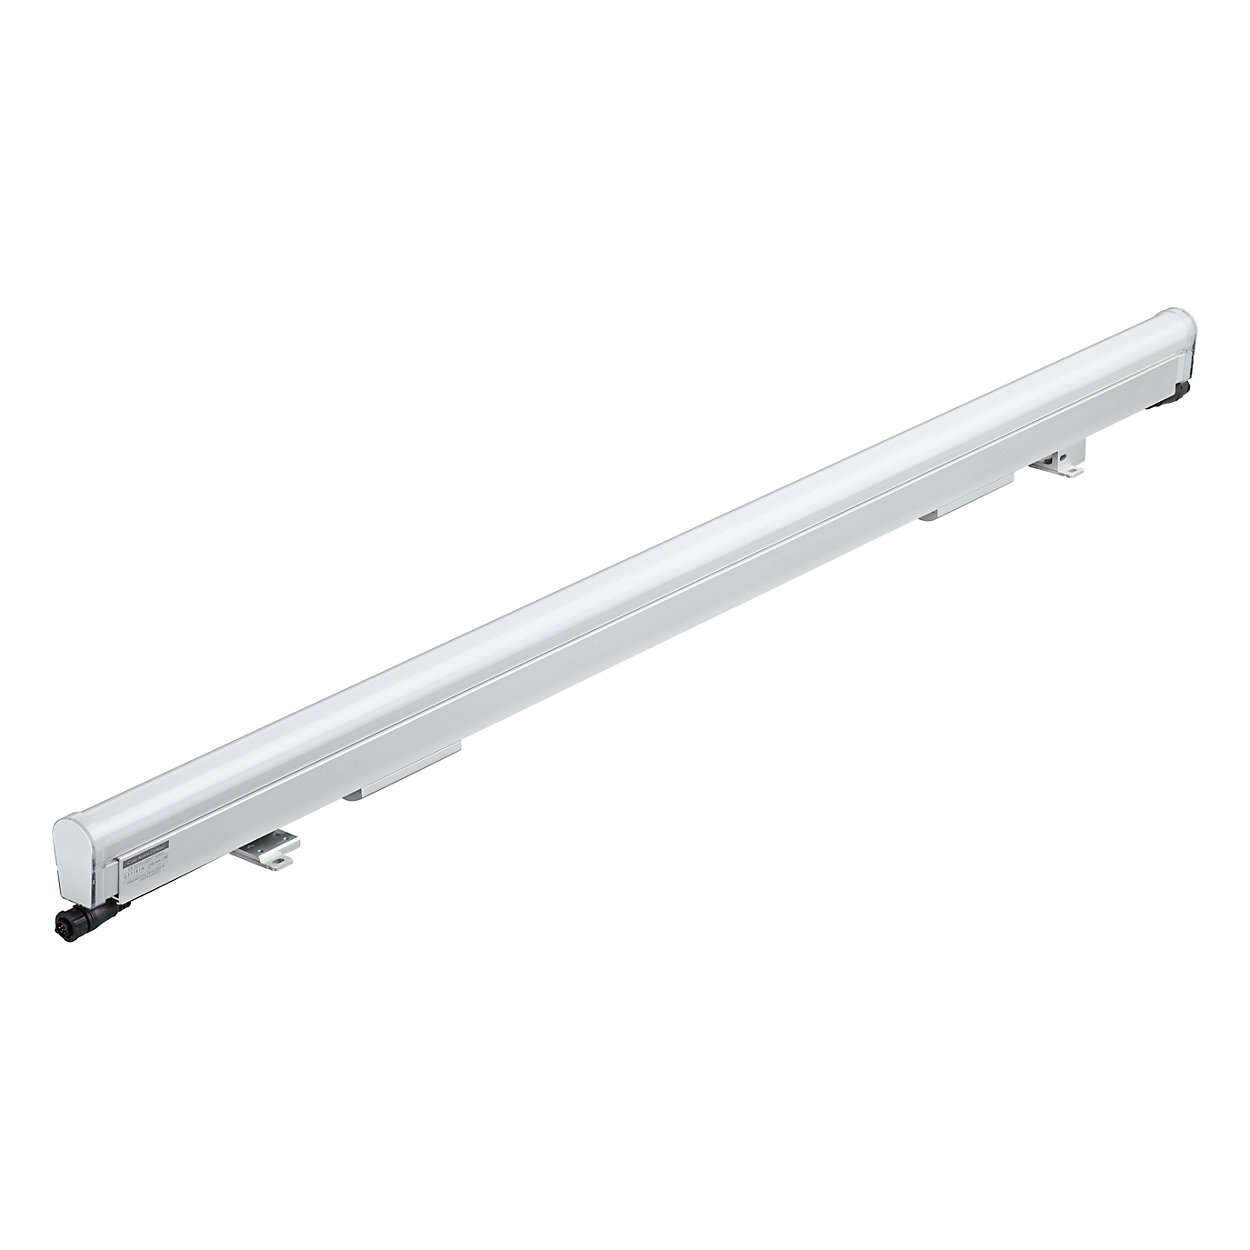 iColor Accent Compact - High resolution media direct view linear LED luminaire with RGBW color light